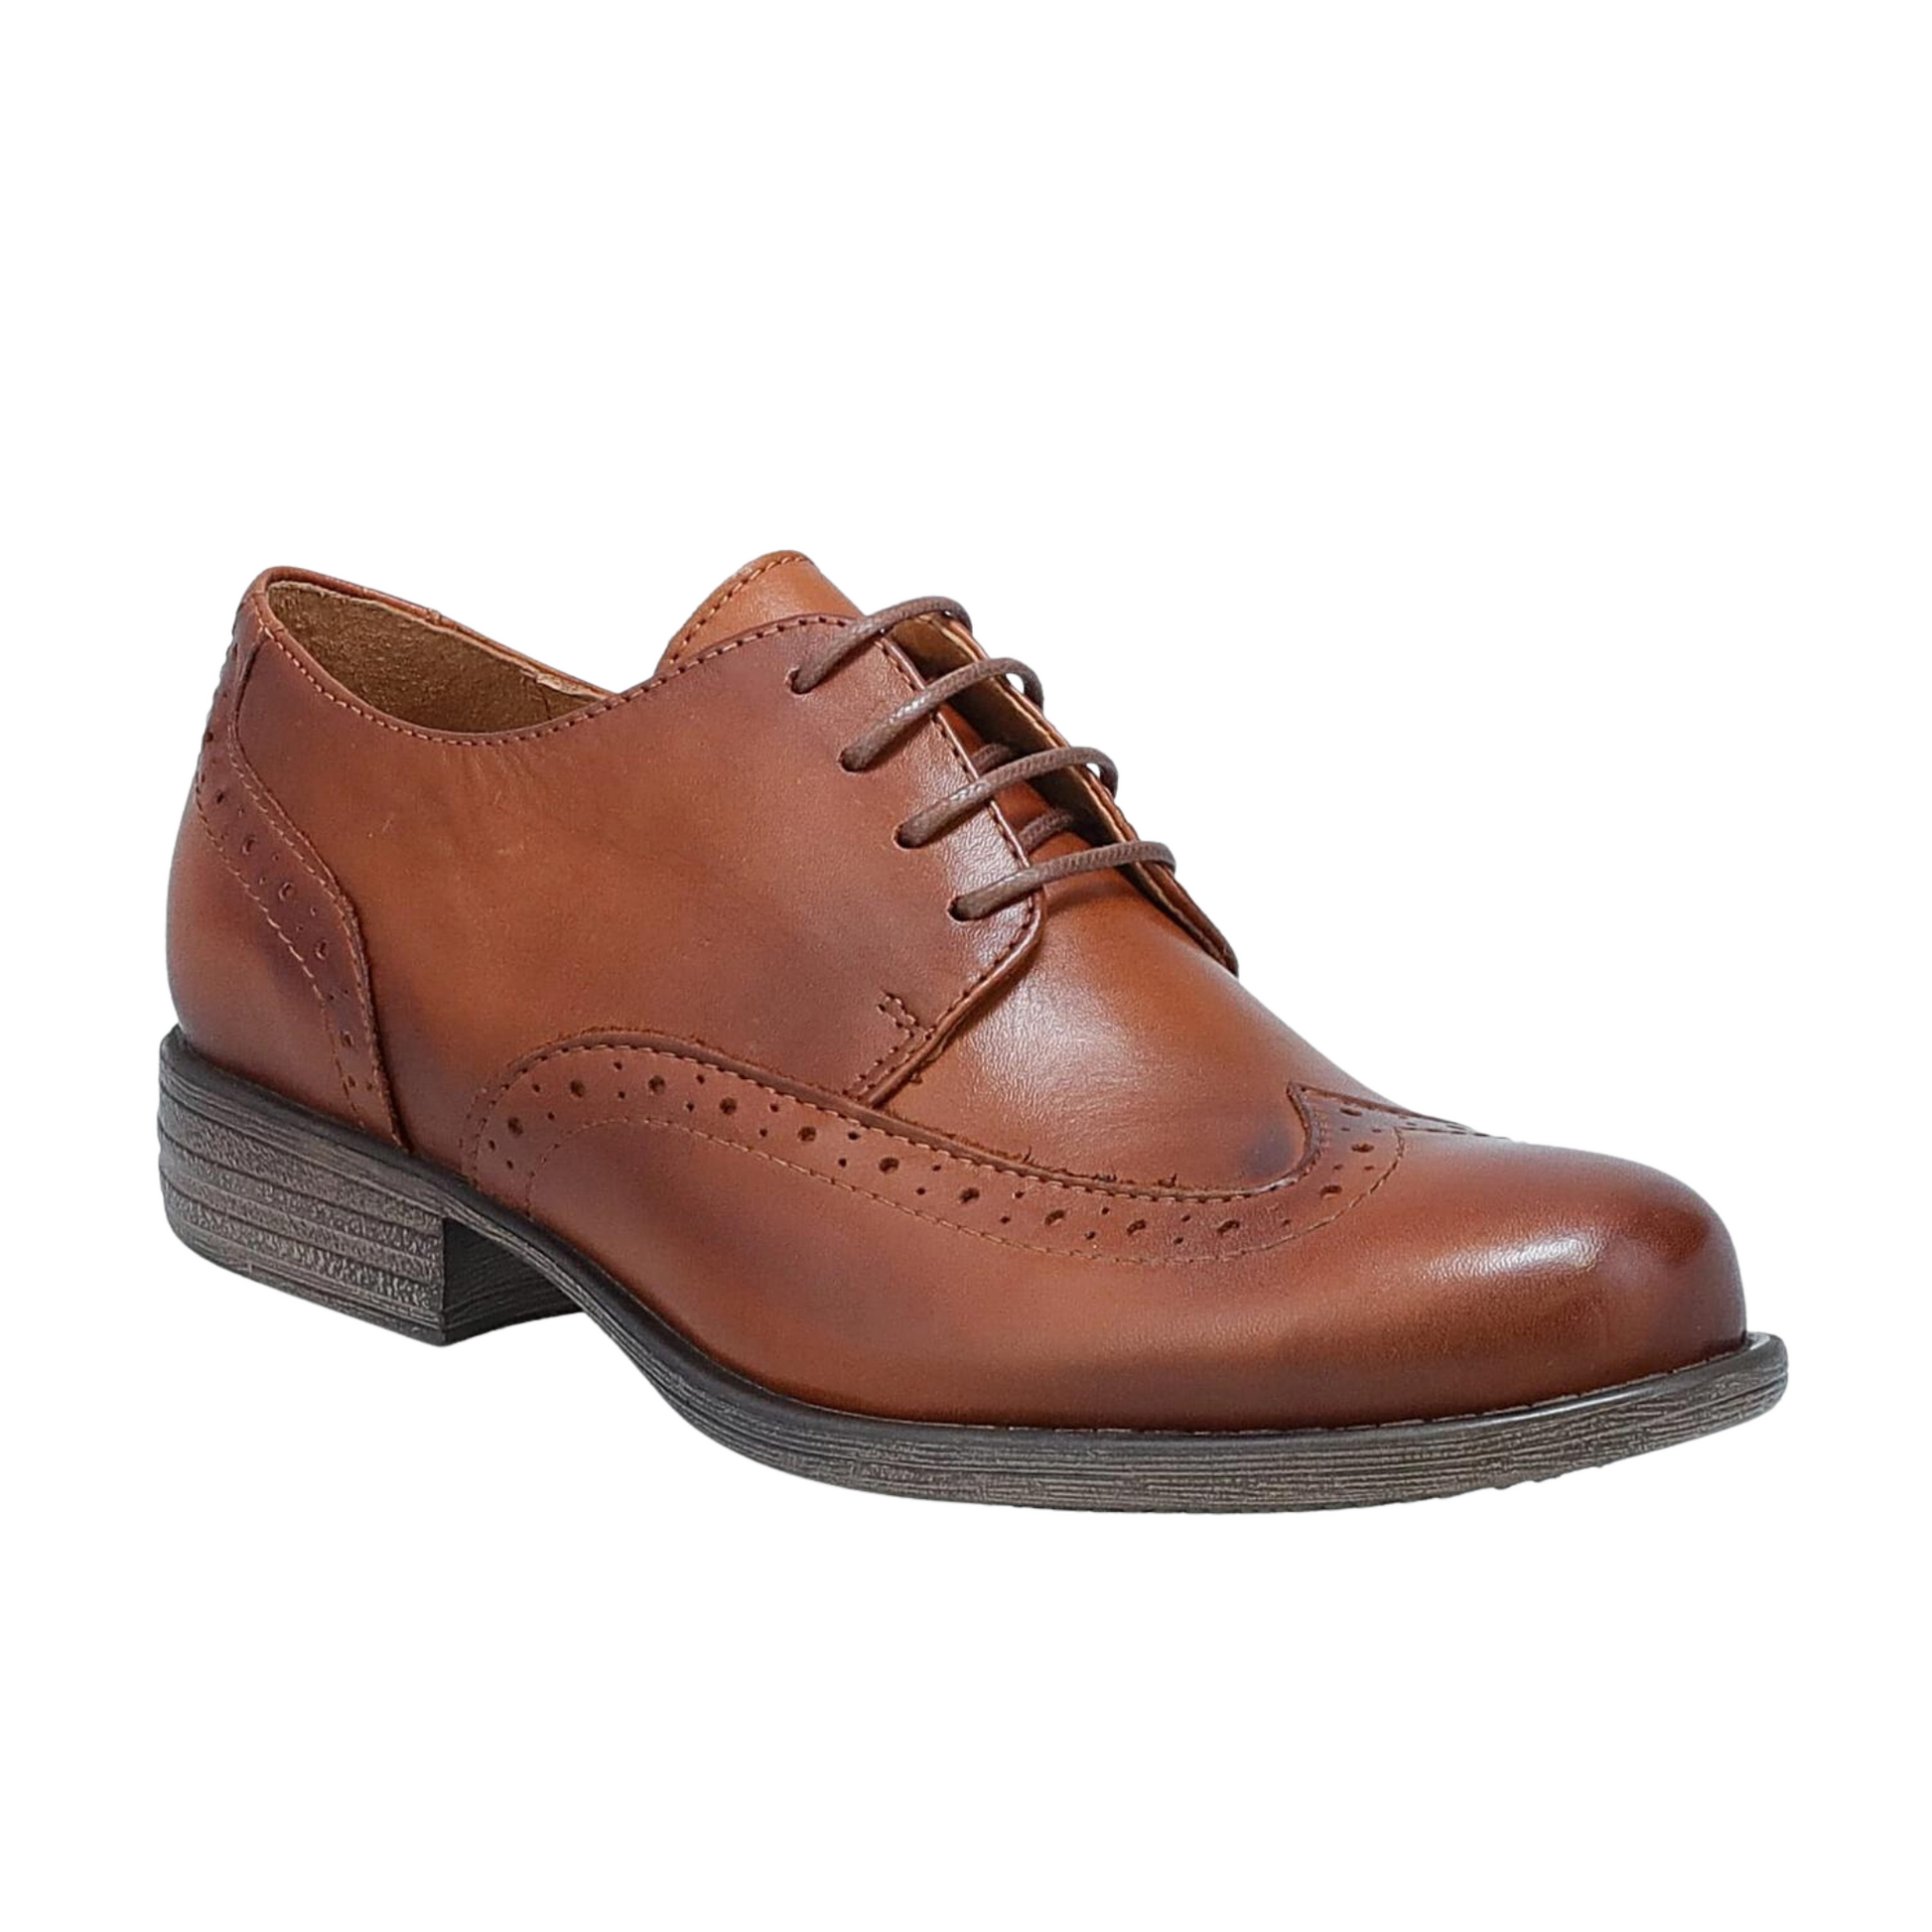 Front angle profile of the Miz Mooz Luther Shoe in the colour Brandy.